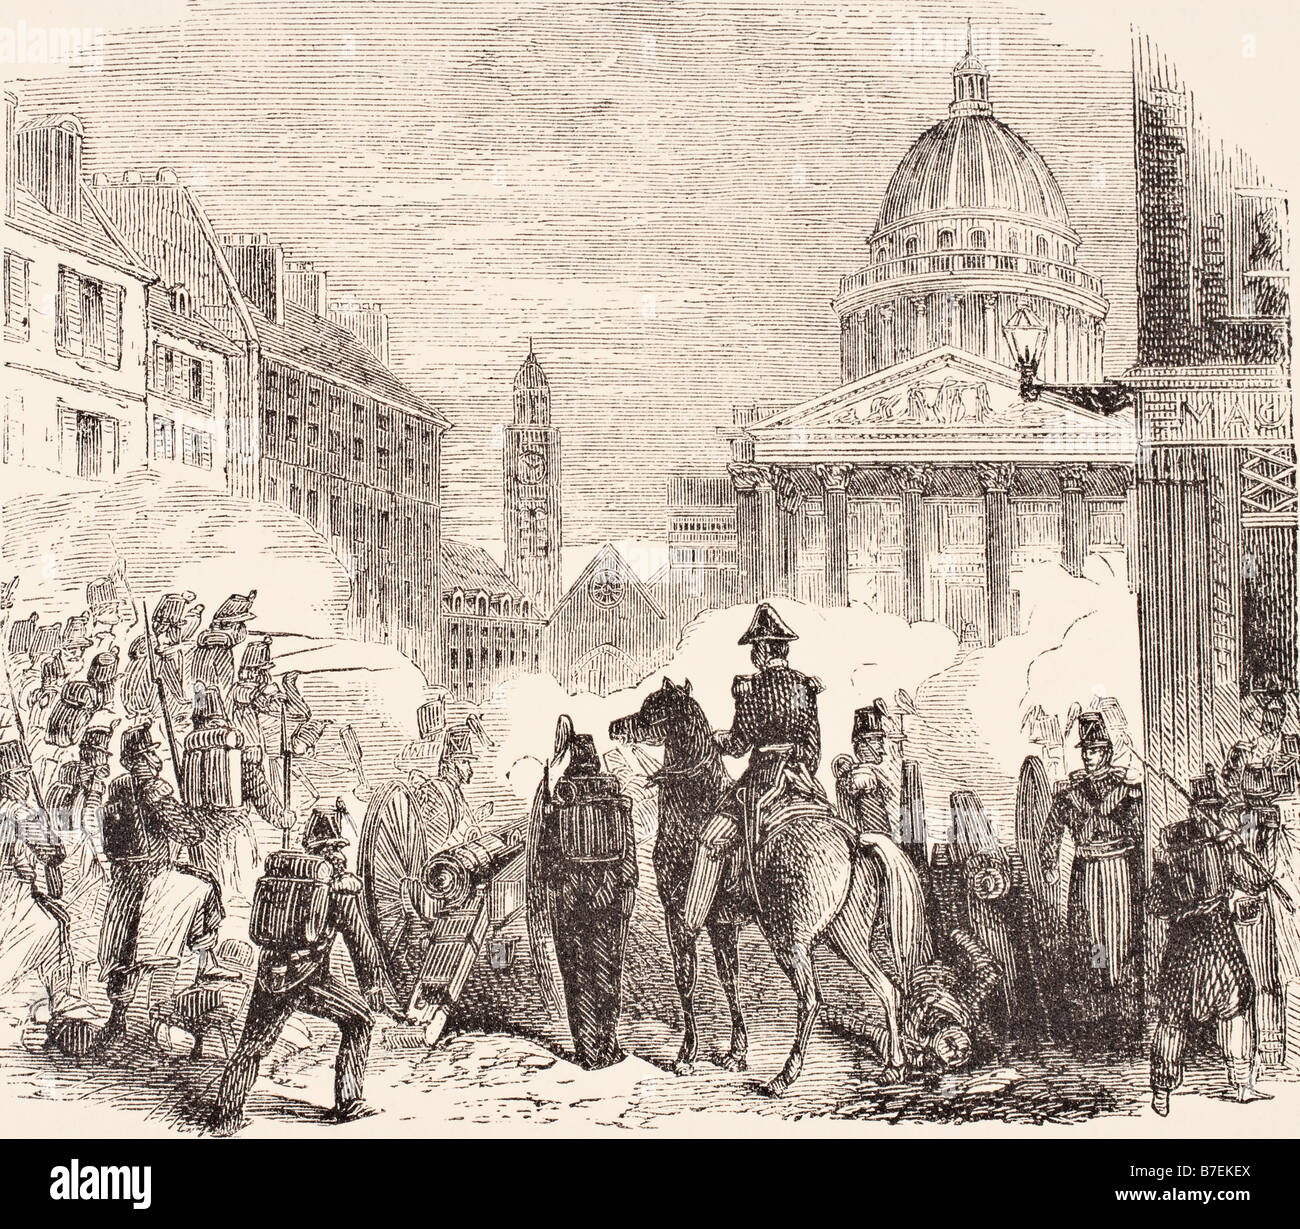 Incident near the Pantheon, Paris during the French workers revolt from June 23 to June 25, 1848. Stock Photo